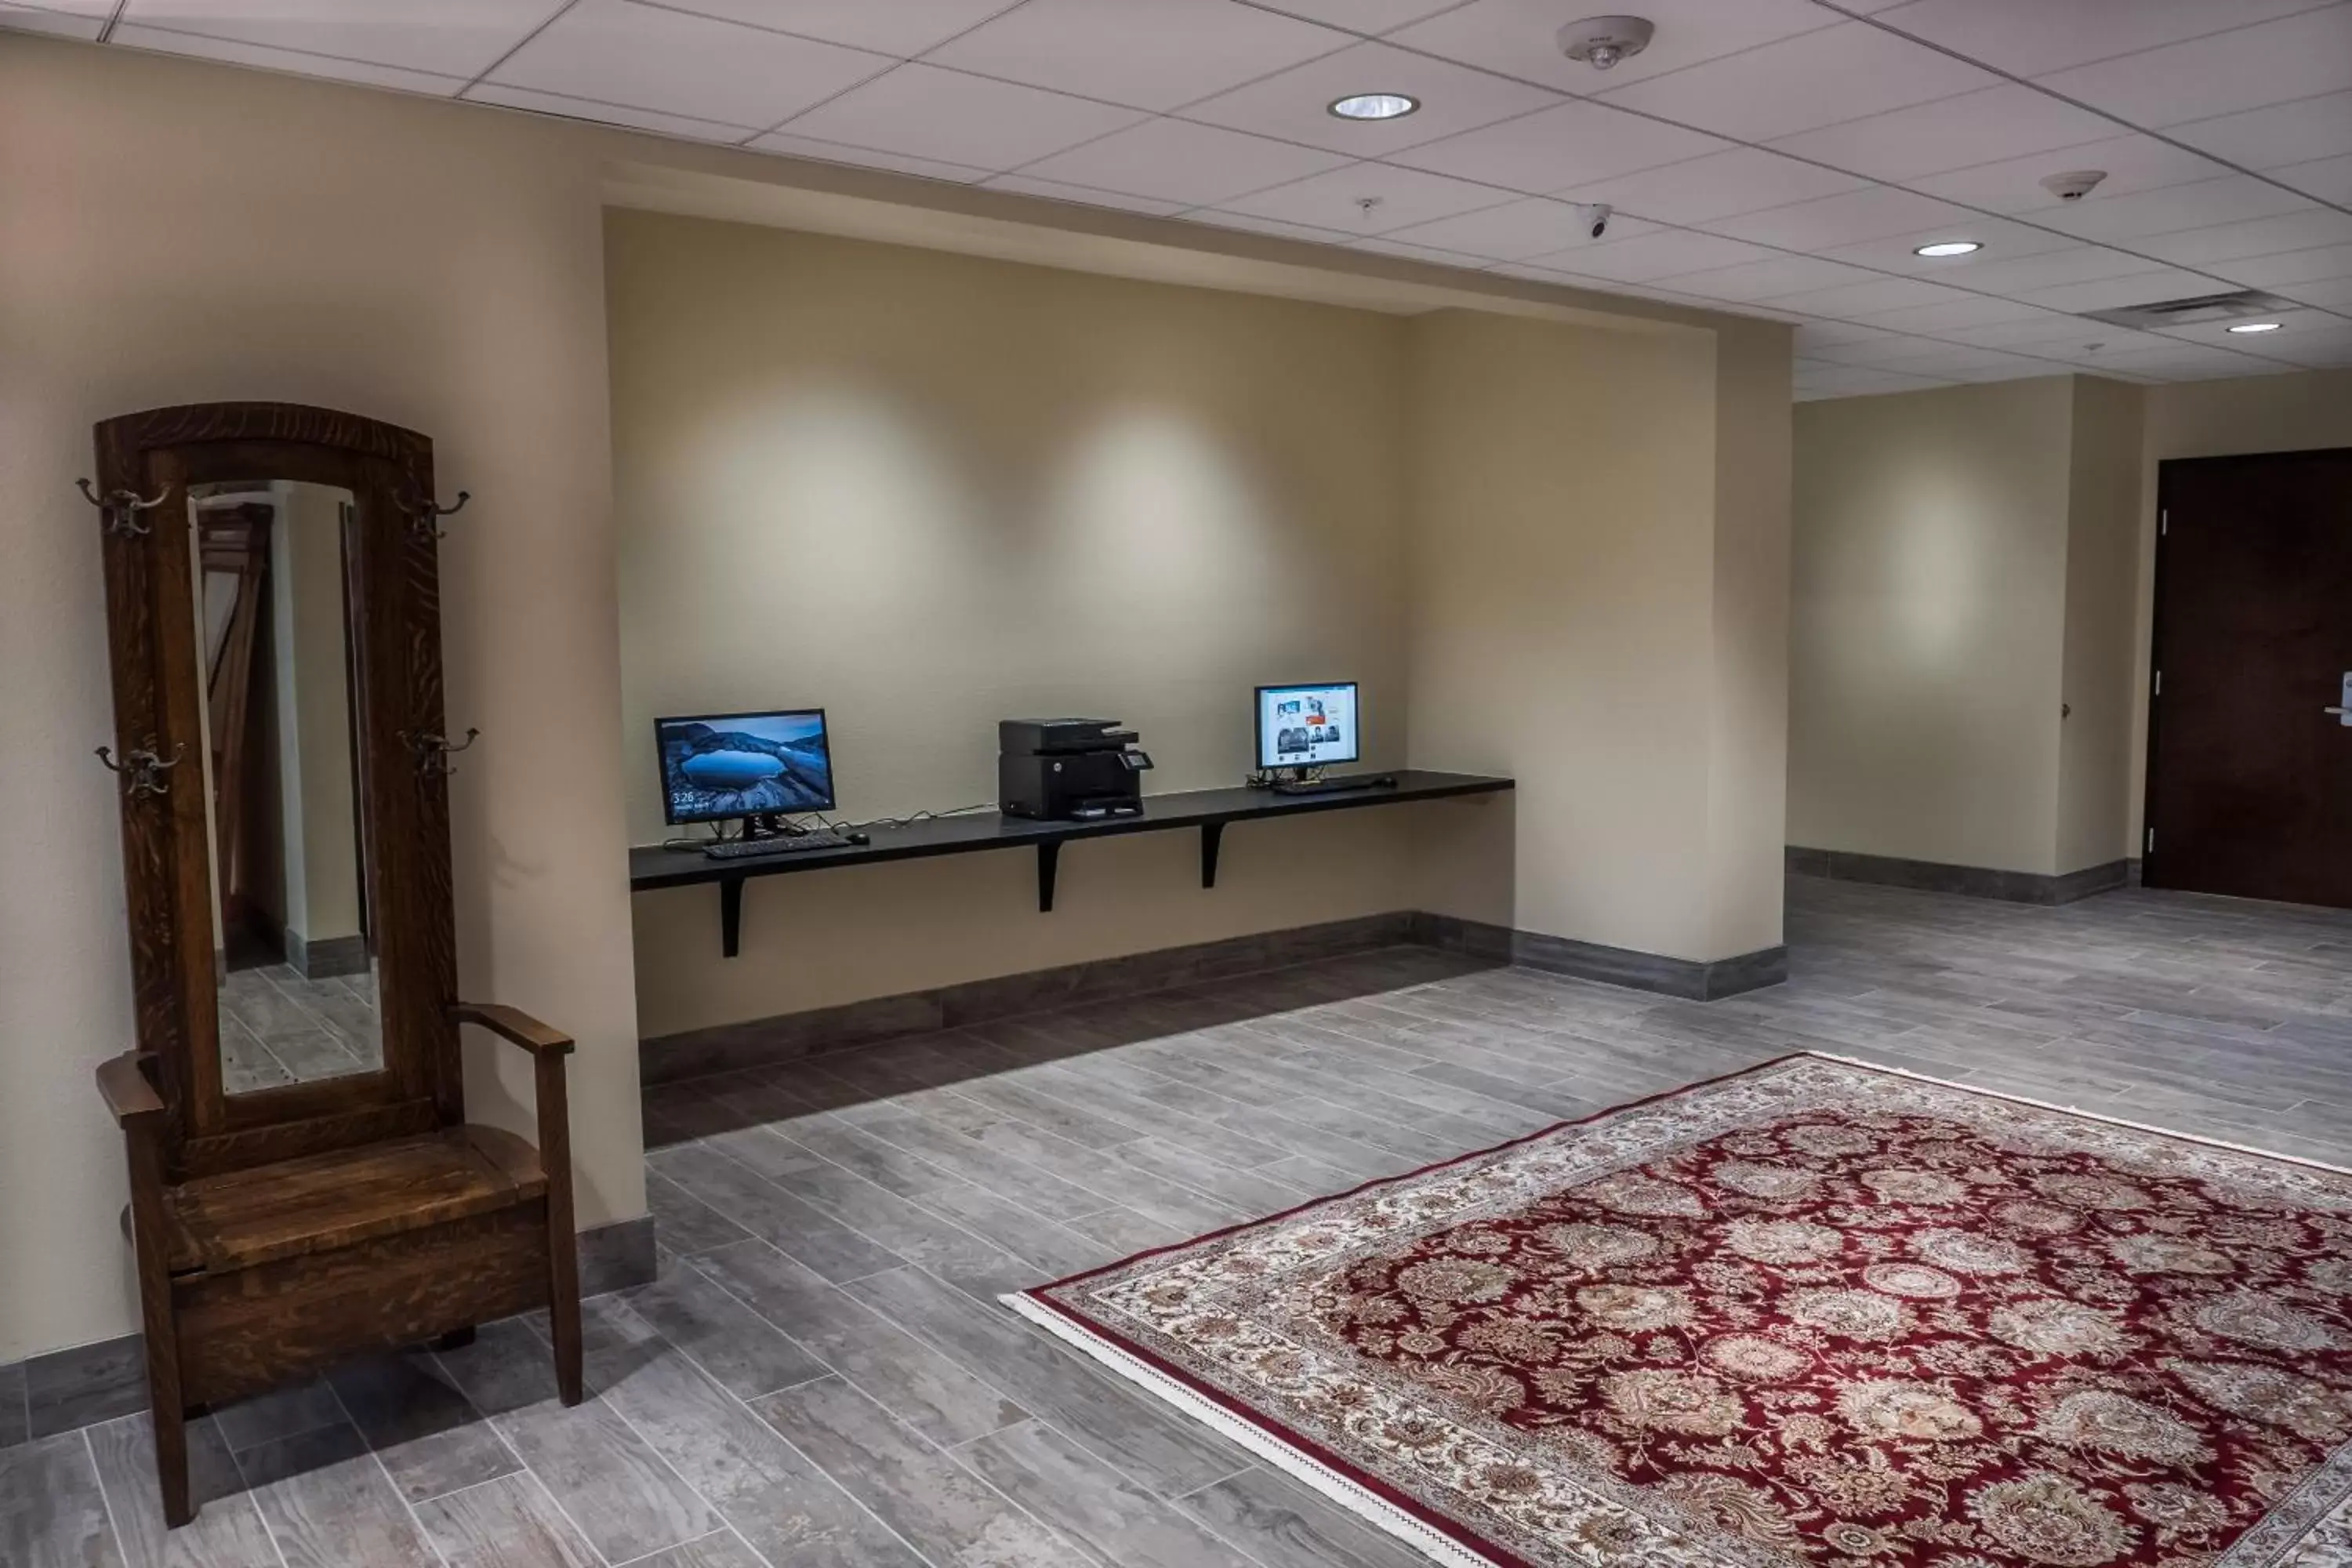 Business facilities, TV/Entertainment Center in Skyline Hotel and Casino